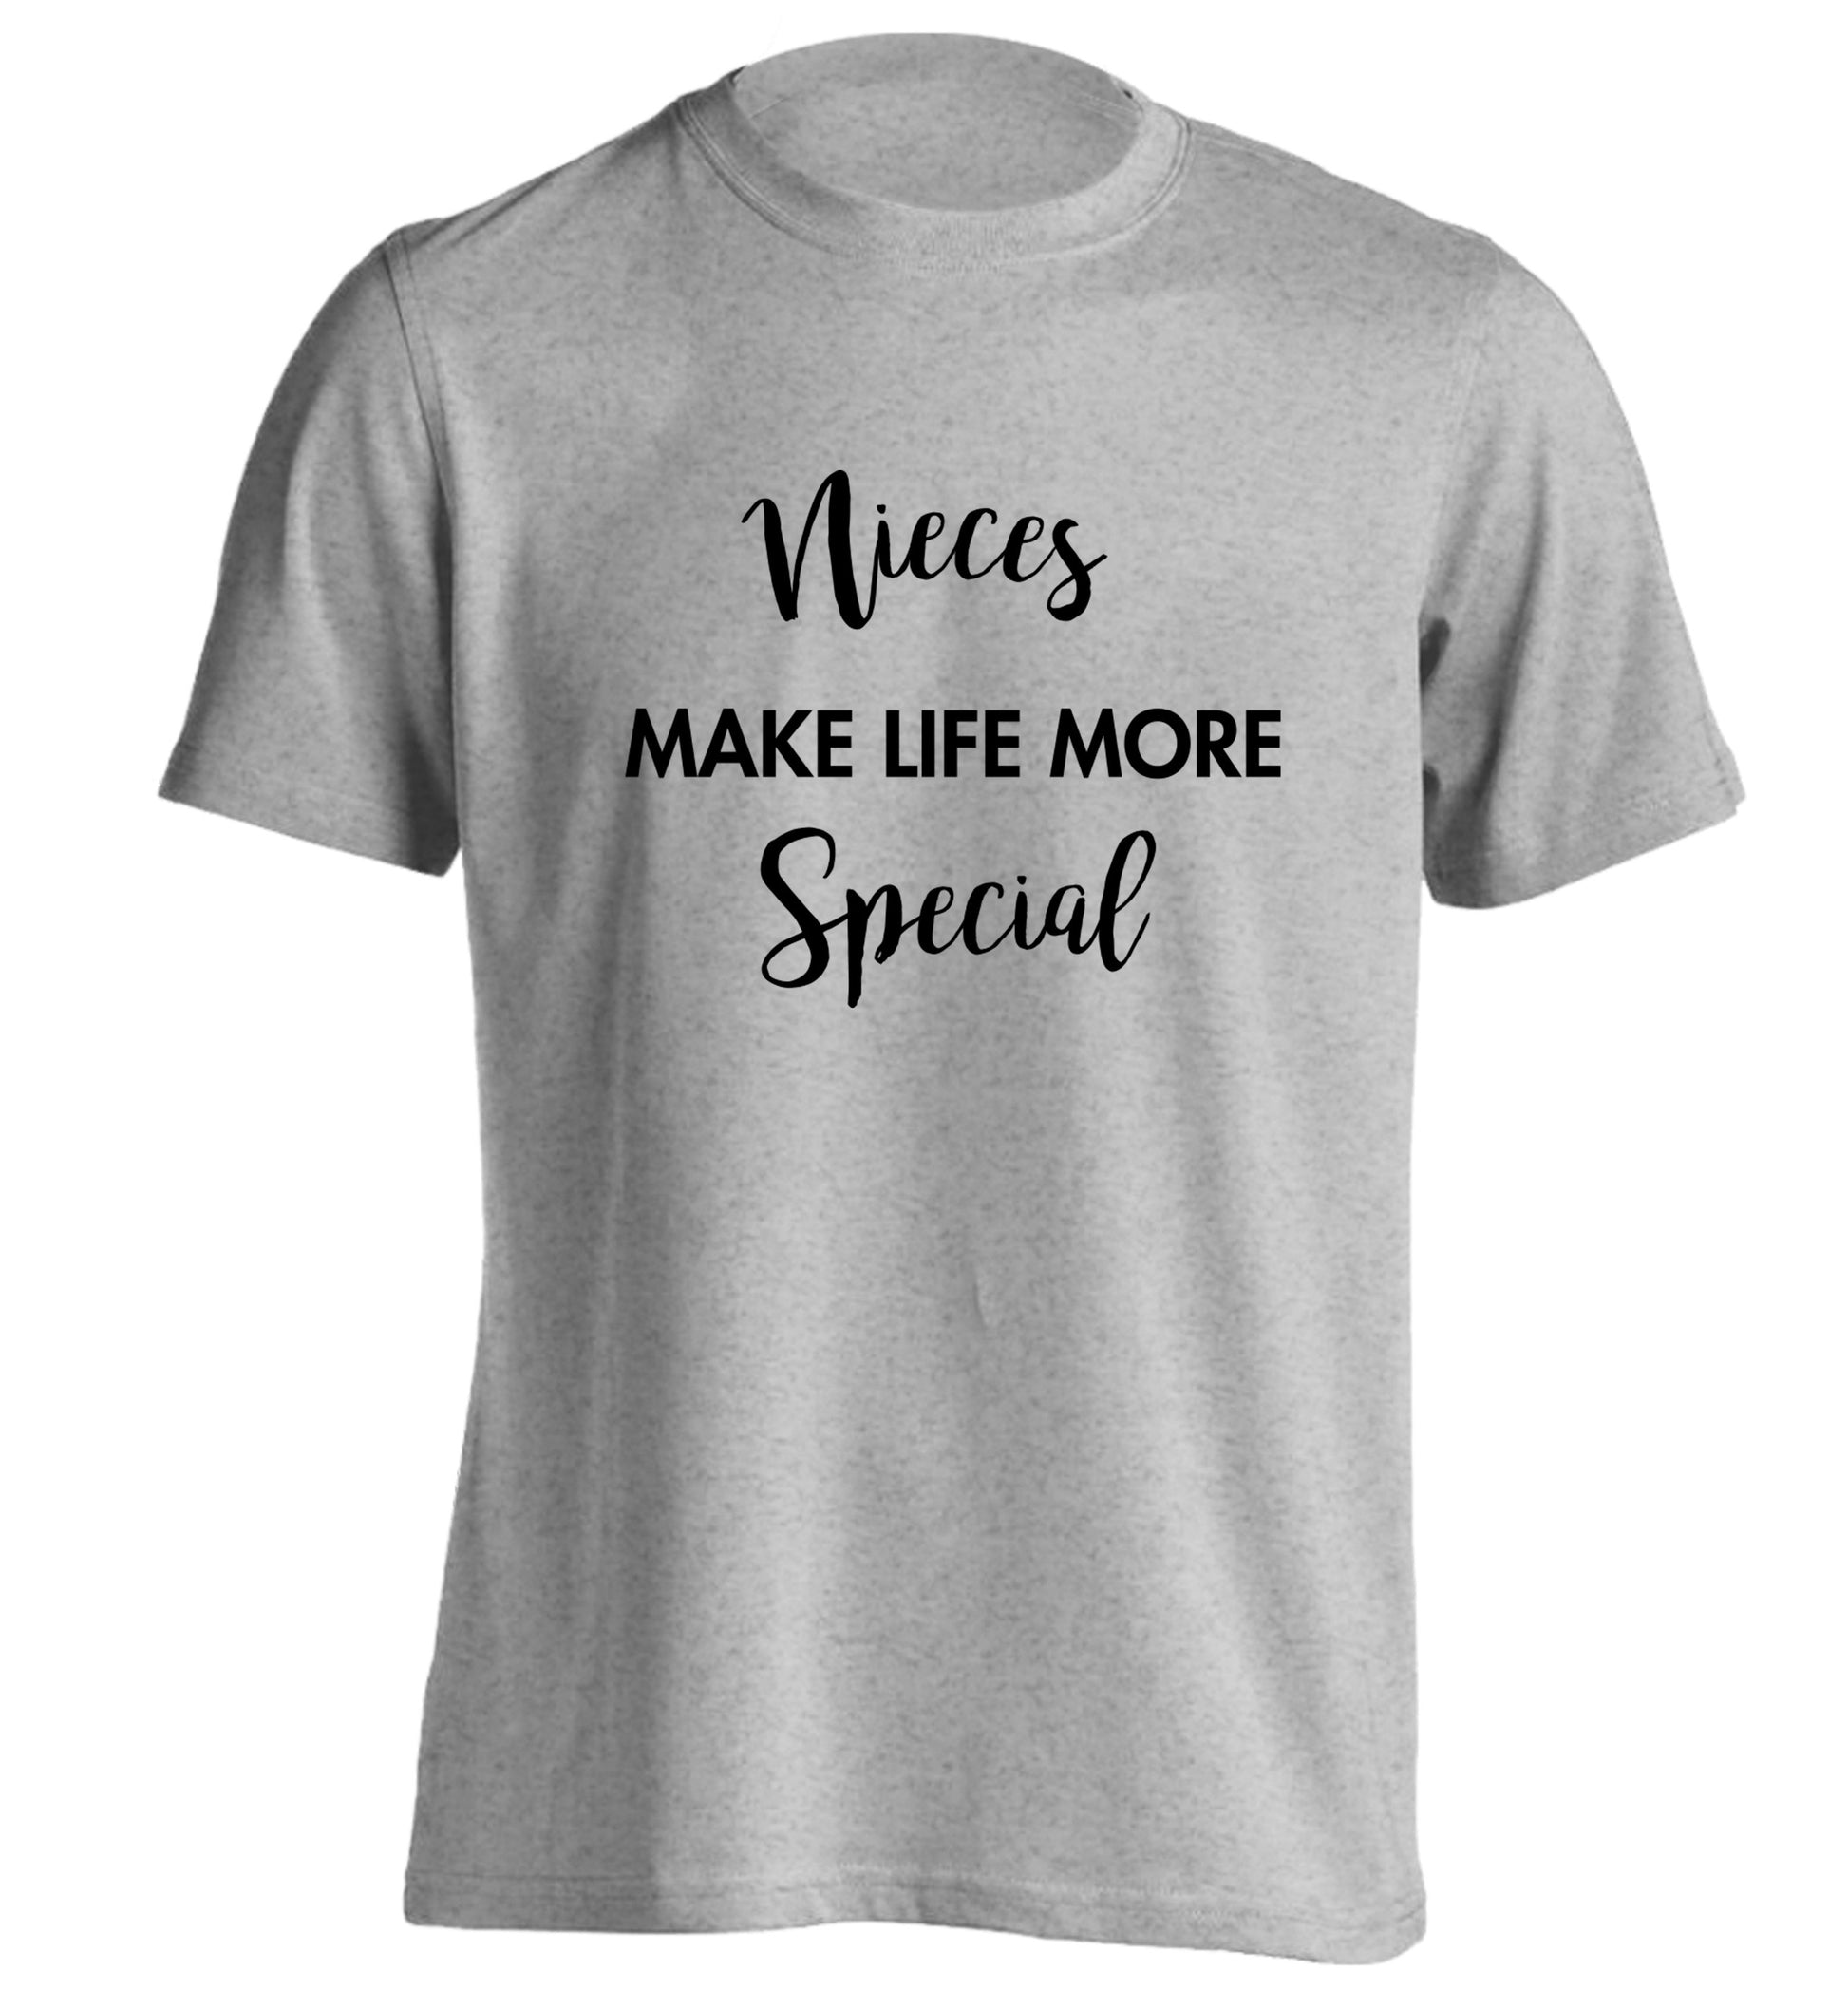 Nieces make life more special adults unisex grey Tshirt 2XL